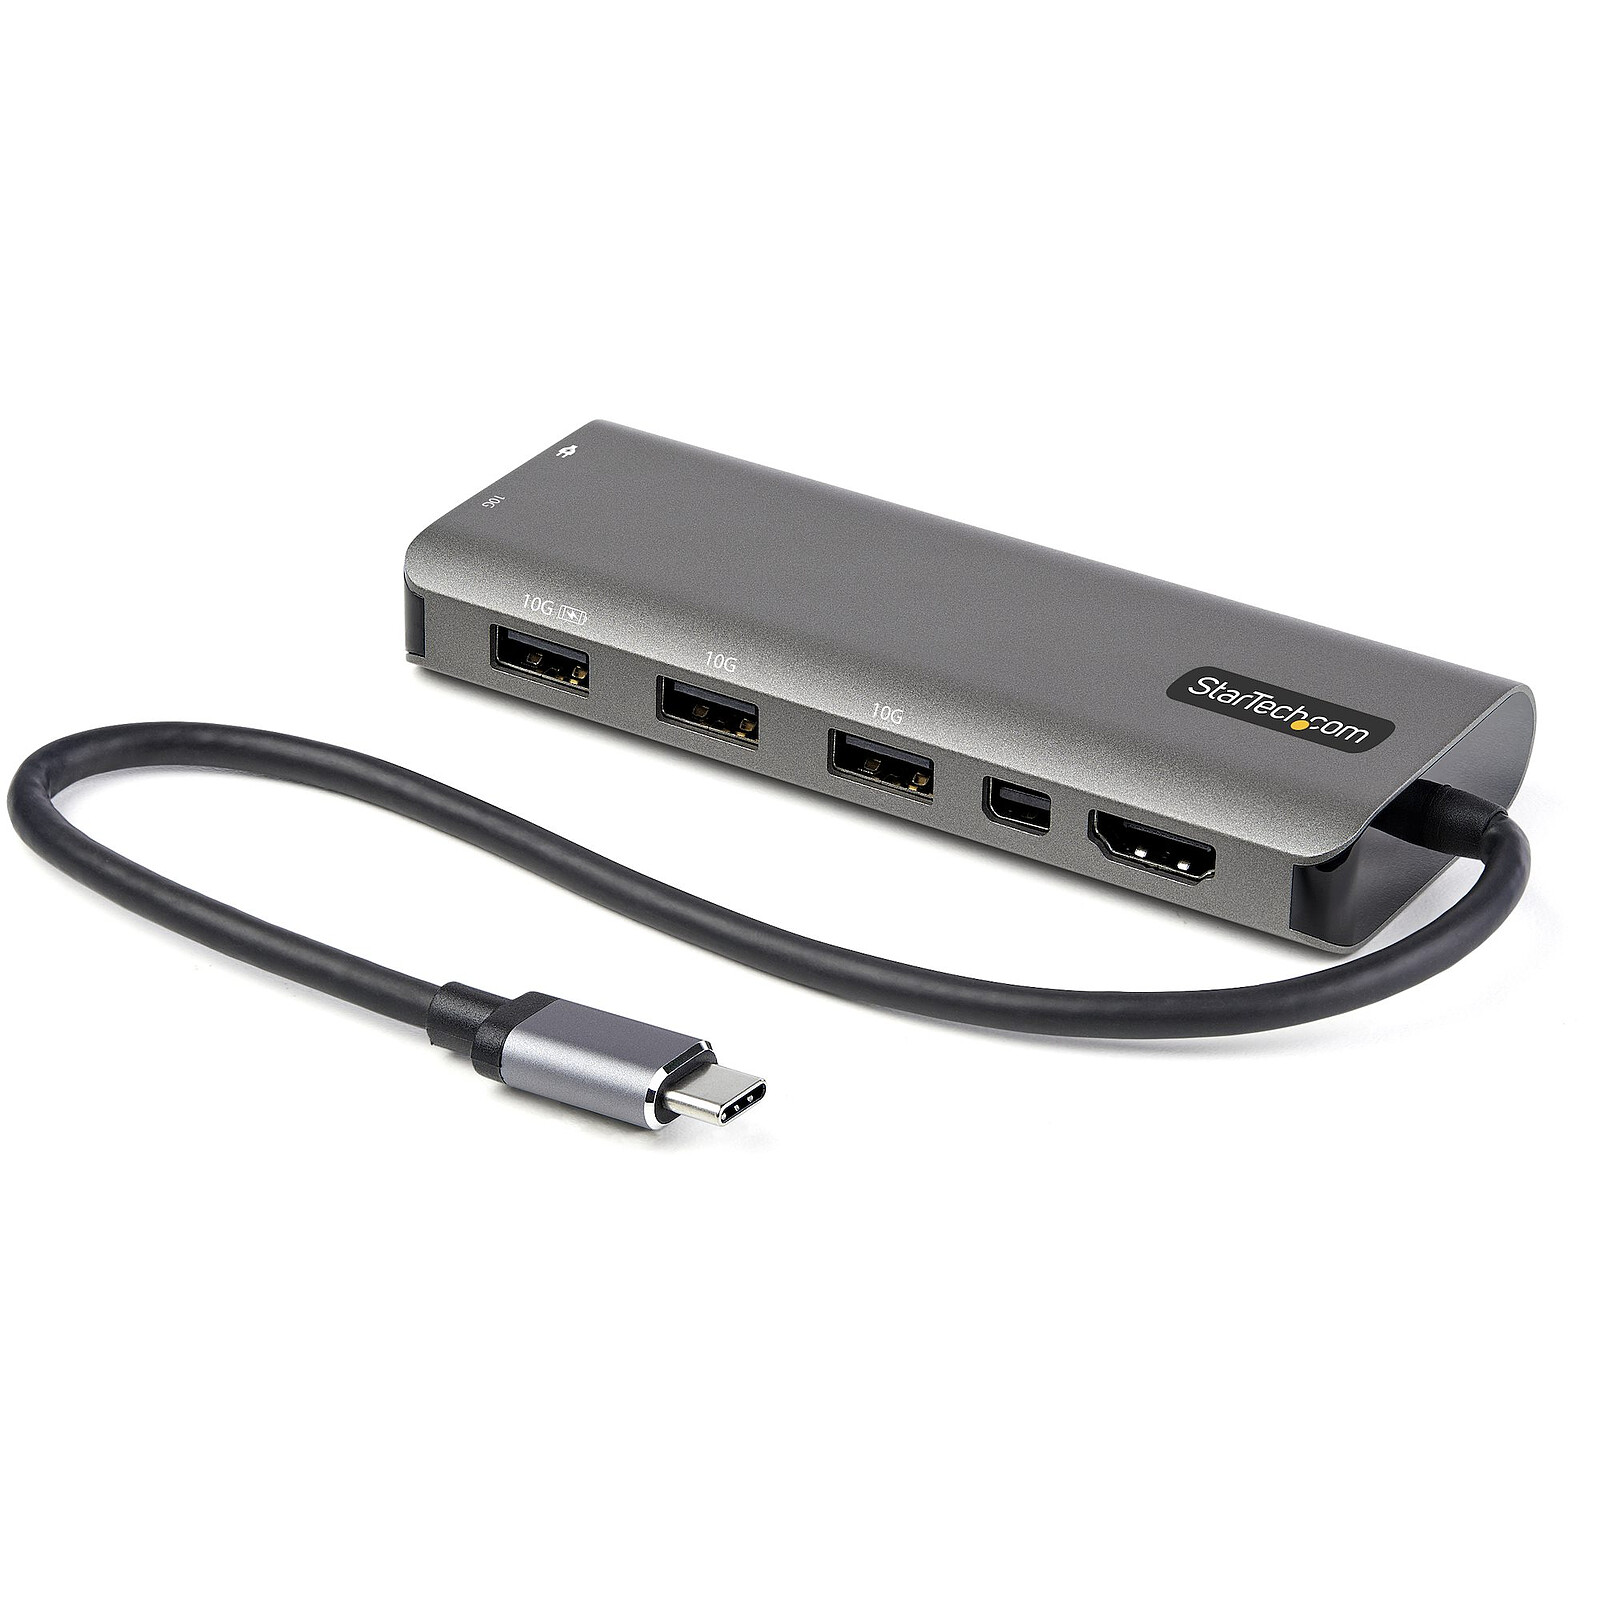 StarTech.com Multiport USB-C Adapter with HDMI or Mini DisplayPort 4K 4-port USB Hub and 100W Power Delivery - docking station StarTech.com on LDLC